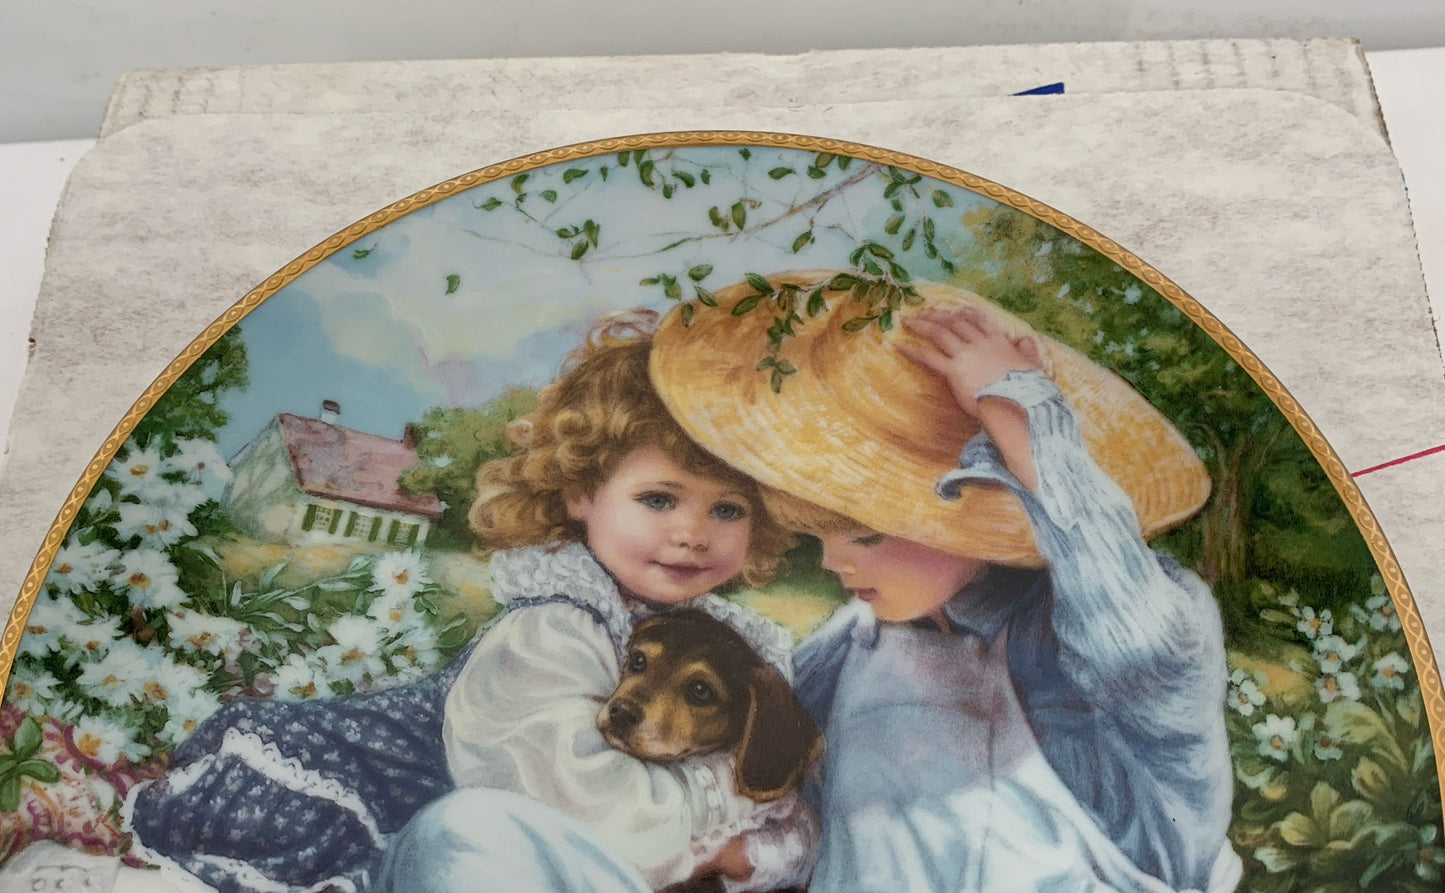 Reco Collector Plate "A Time To Love" Limited Edition By Sandra Kuck 1989